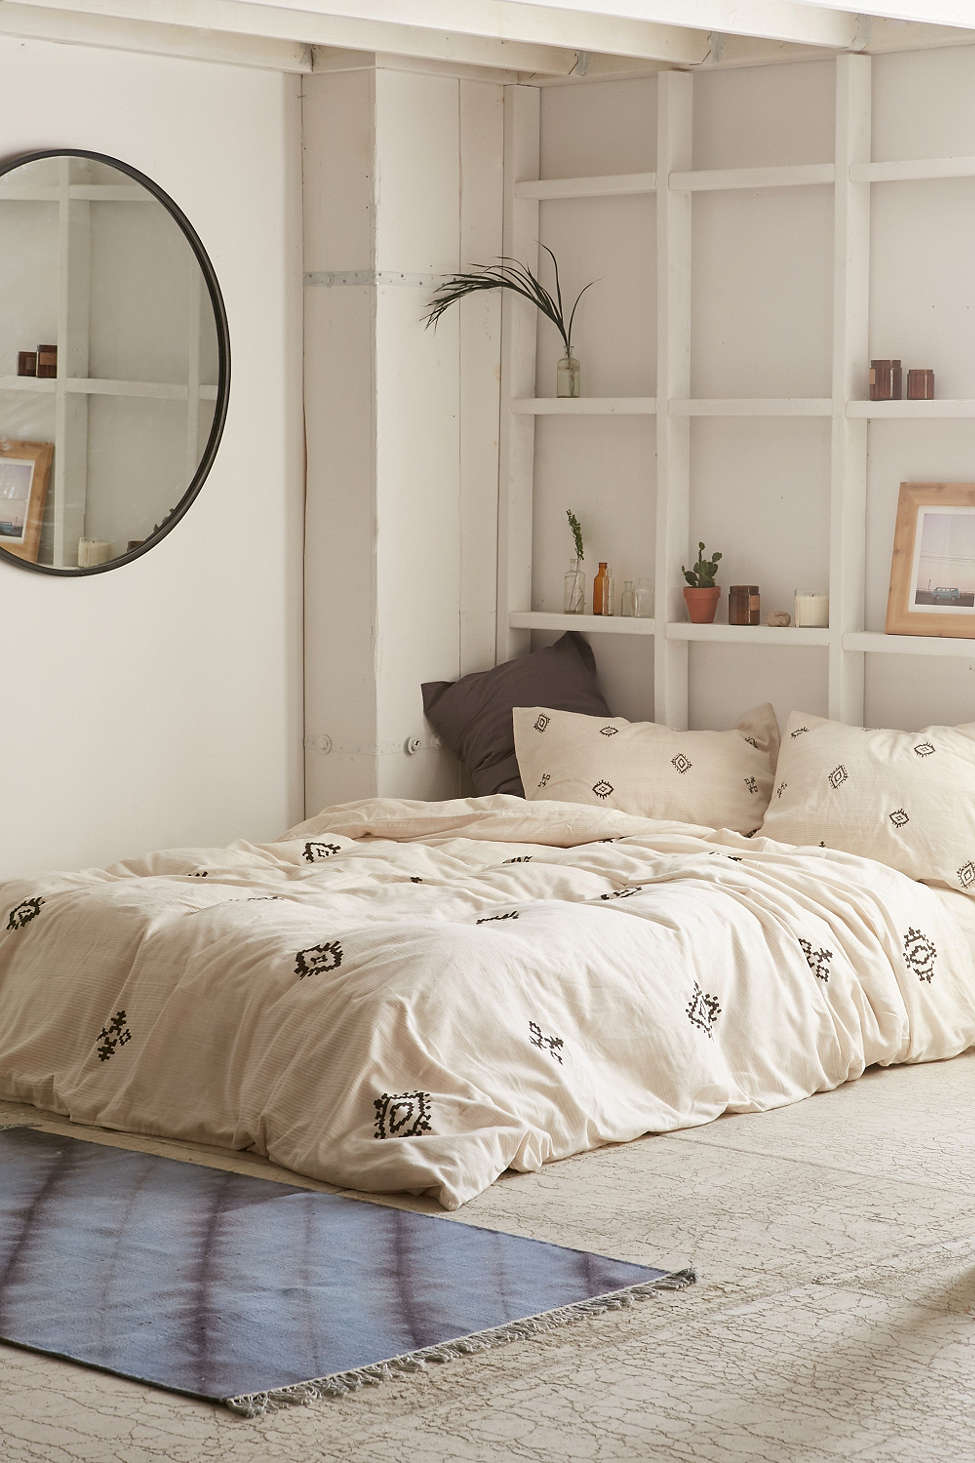 Sparsely decorated bedroom from Urban Outfitters